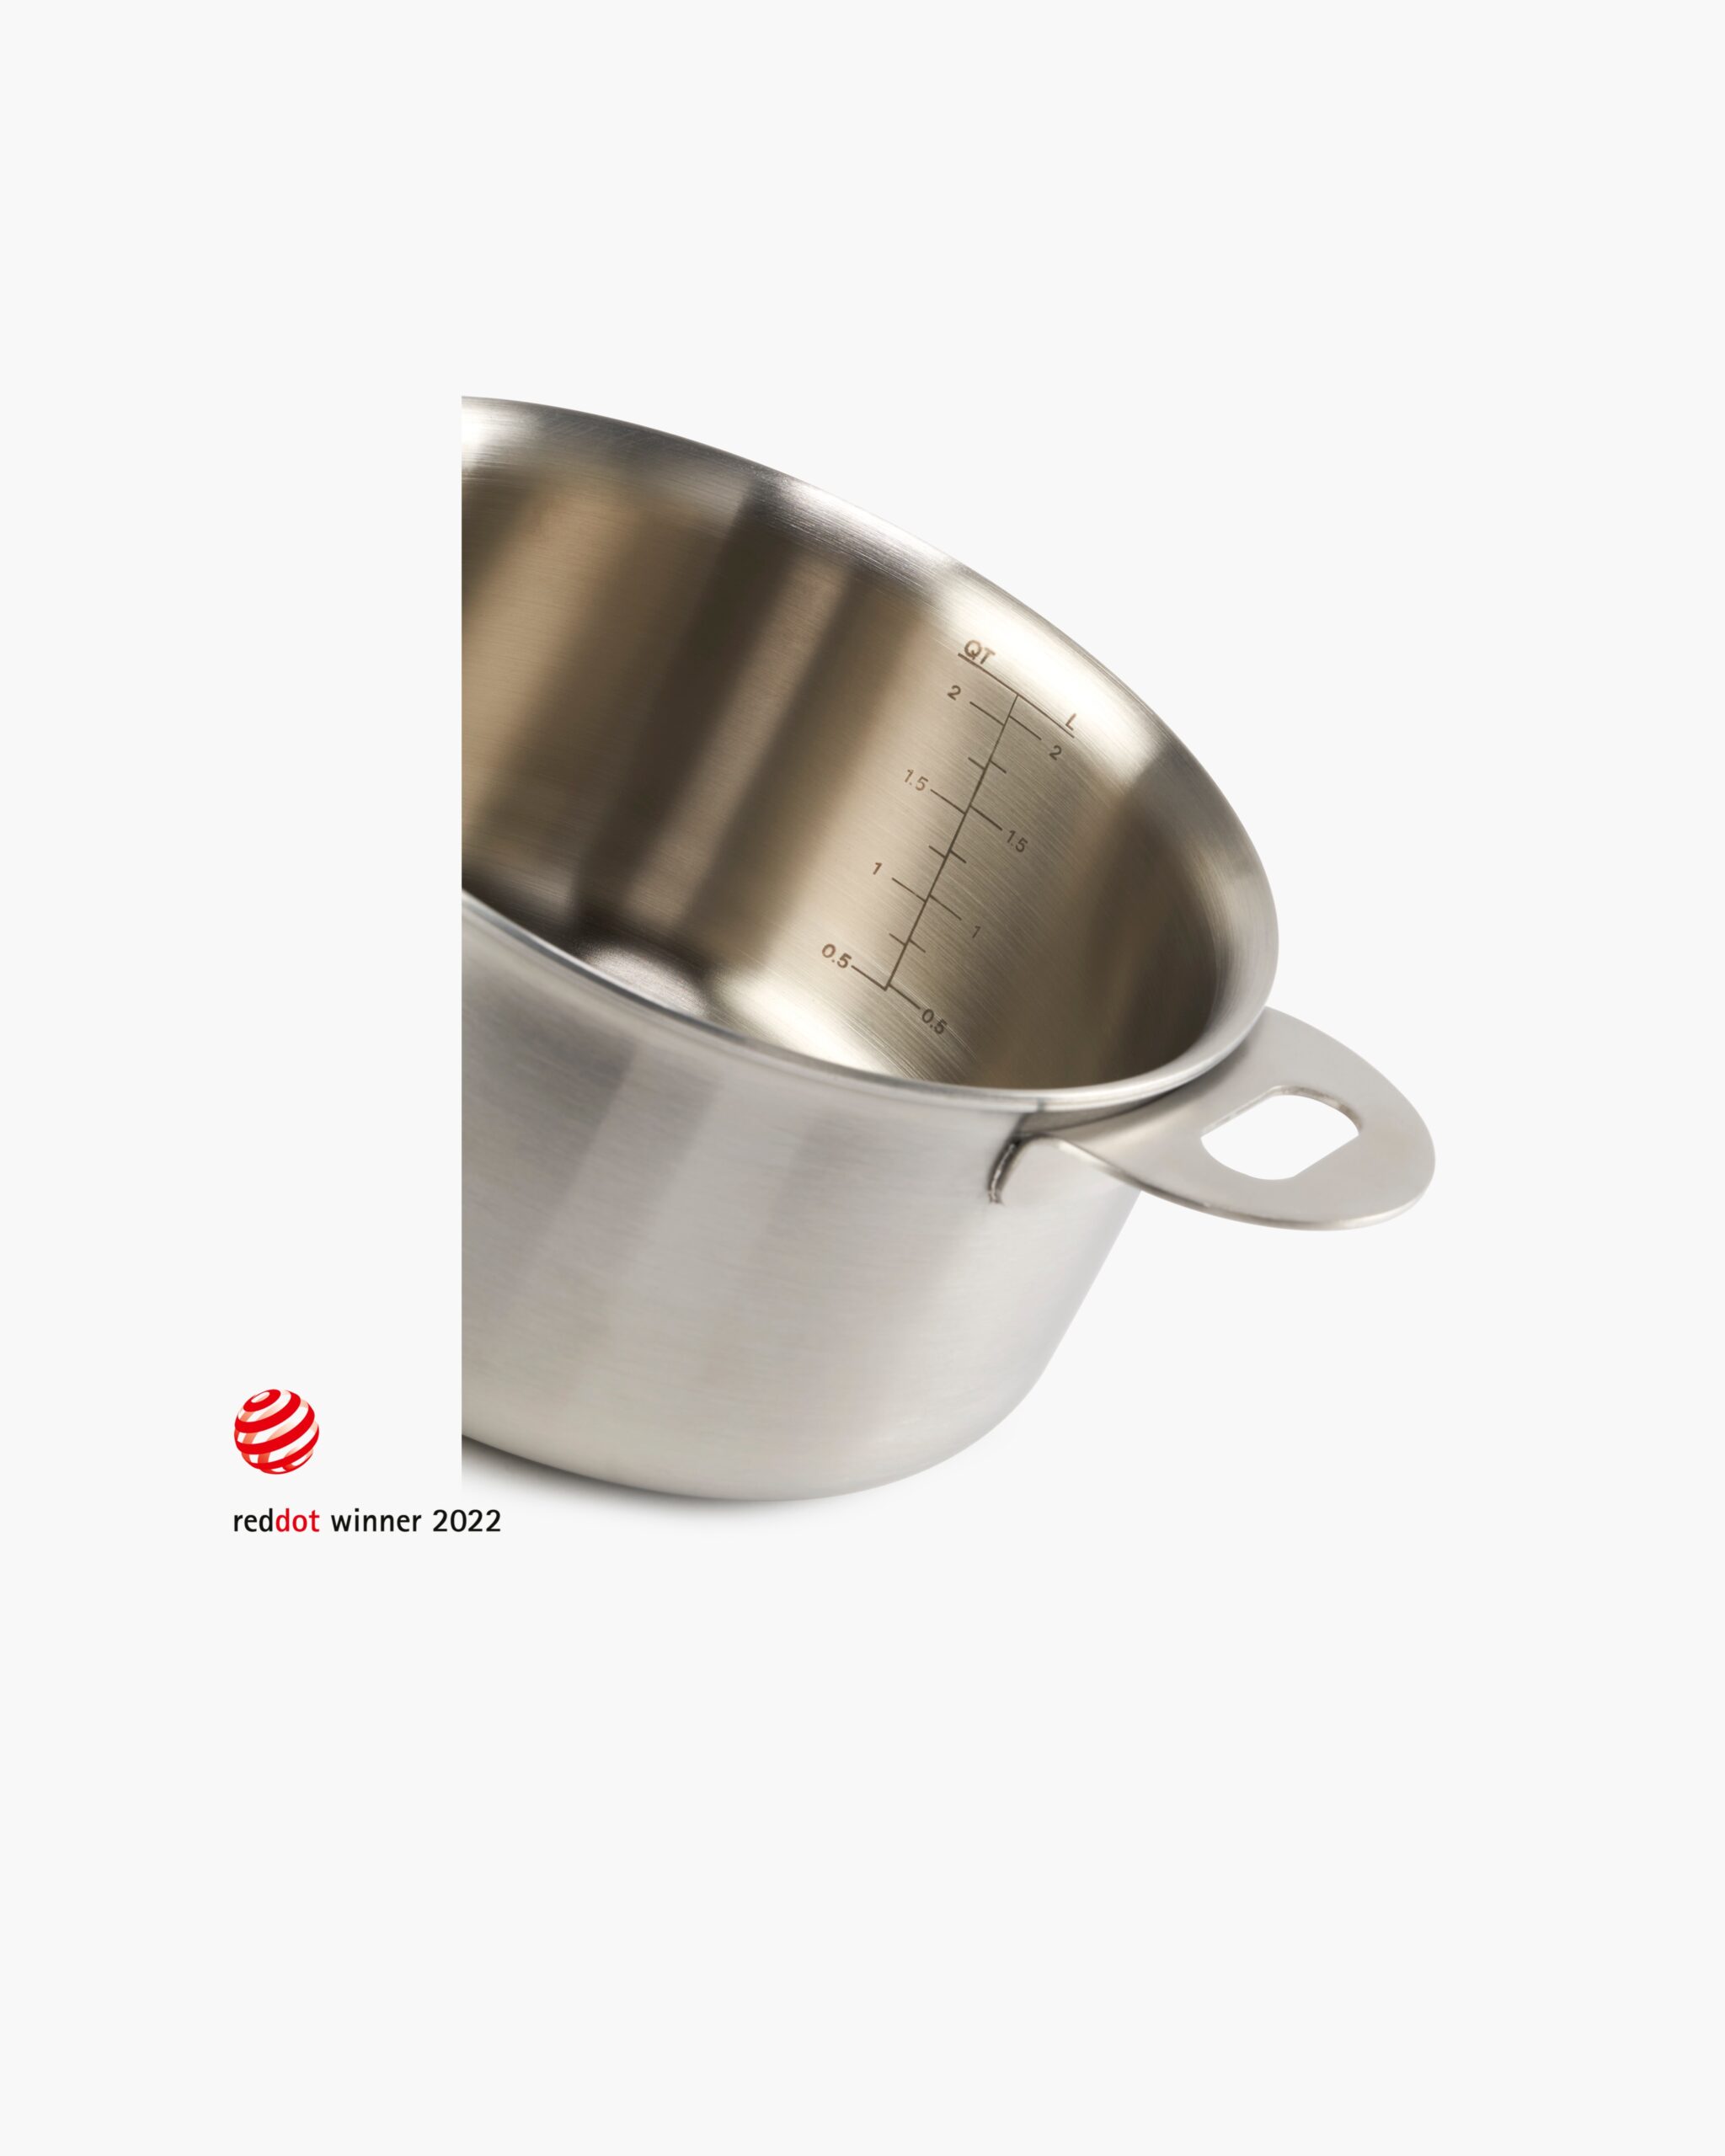 Best Small Saucepan Pan with Lid